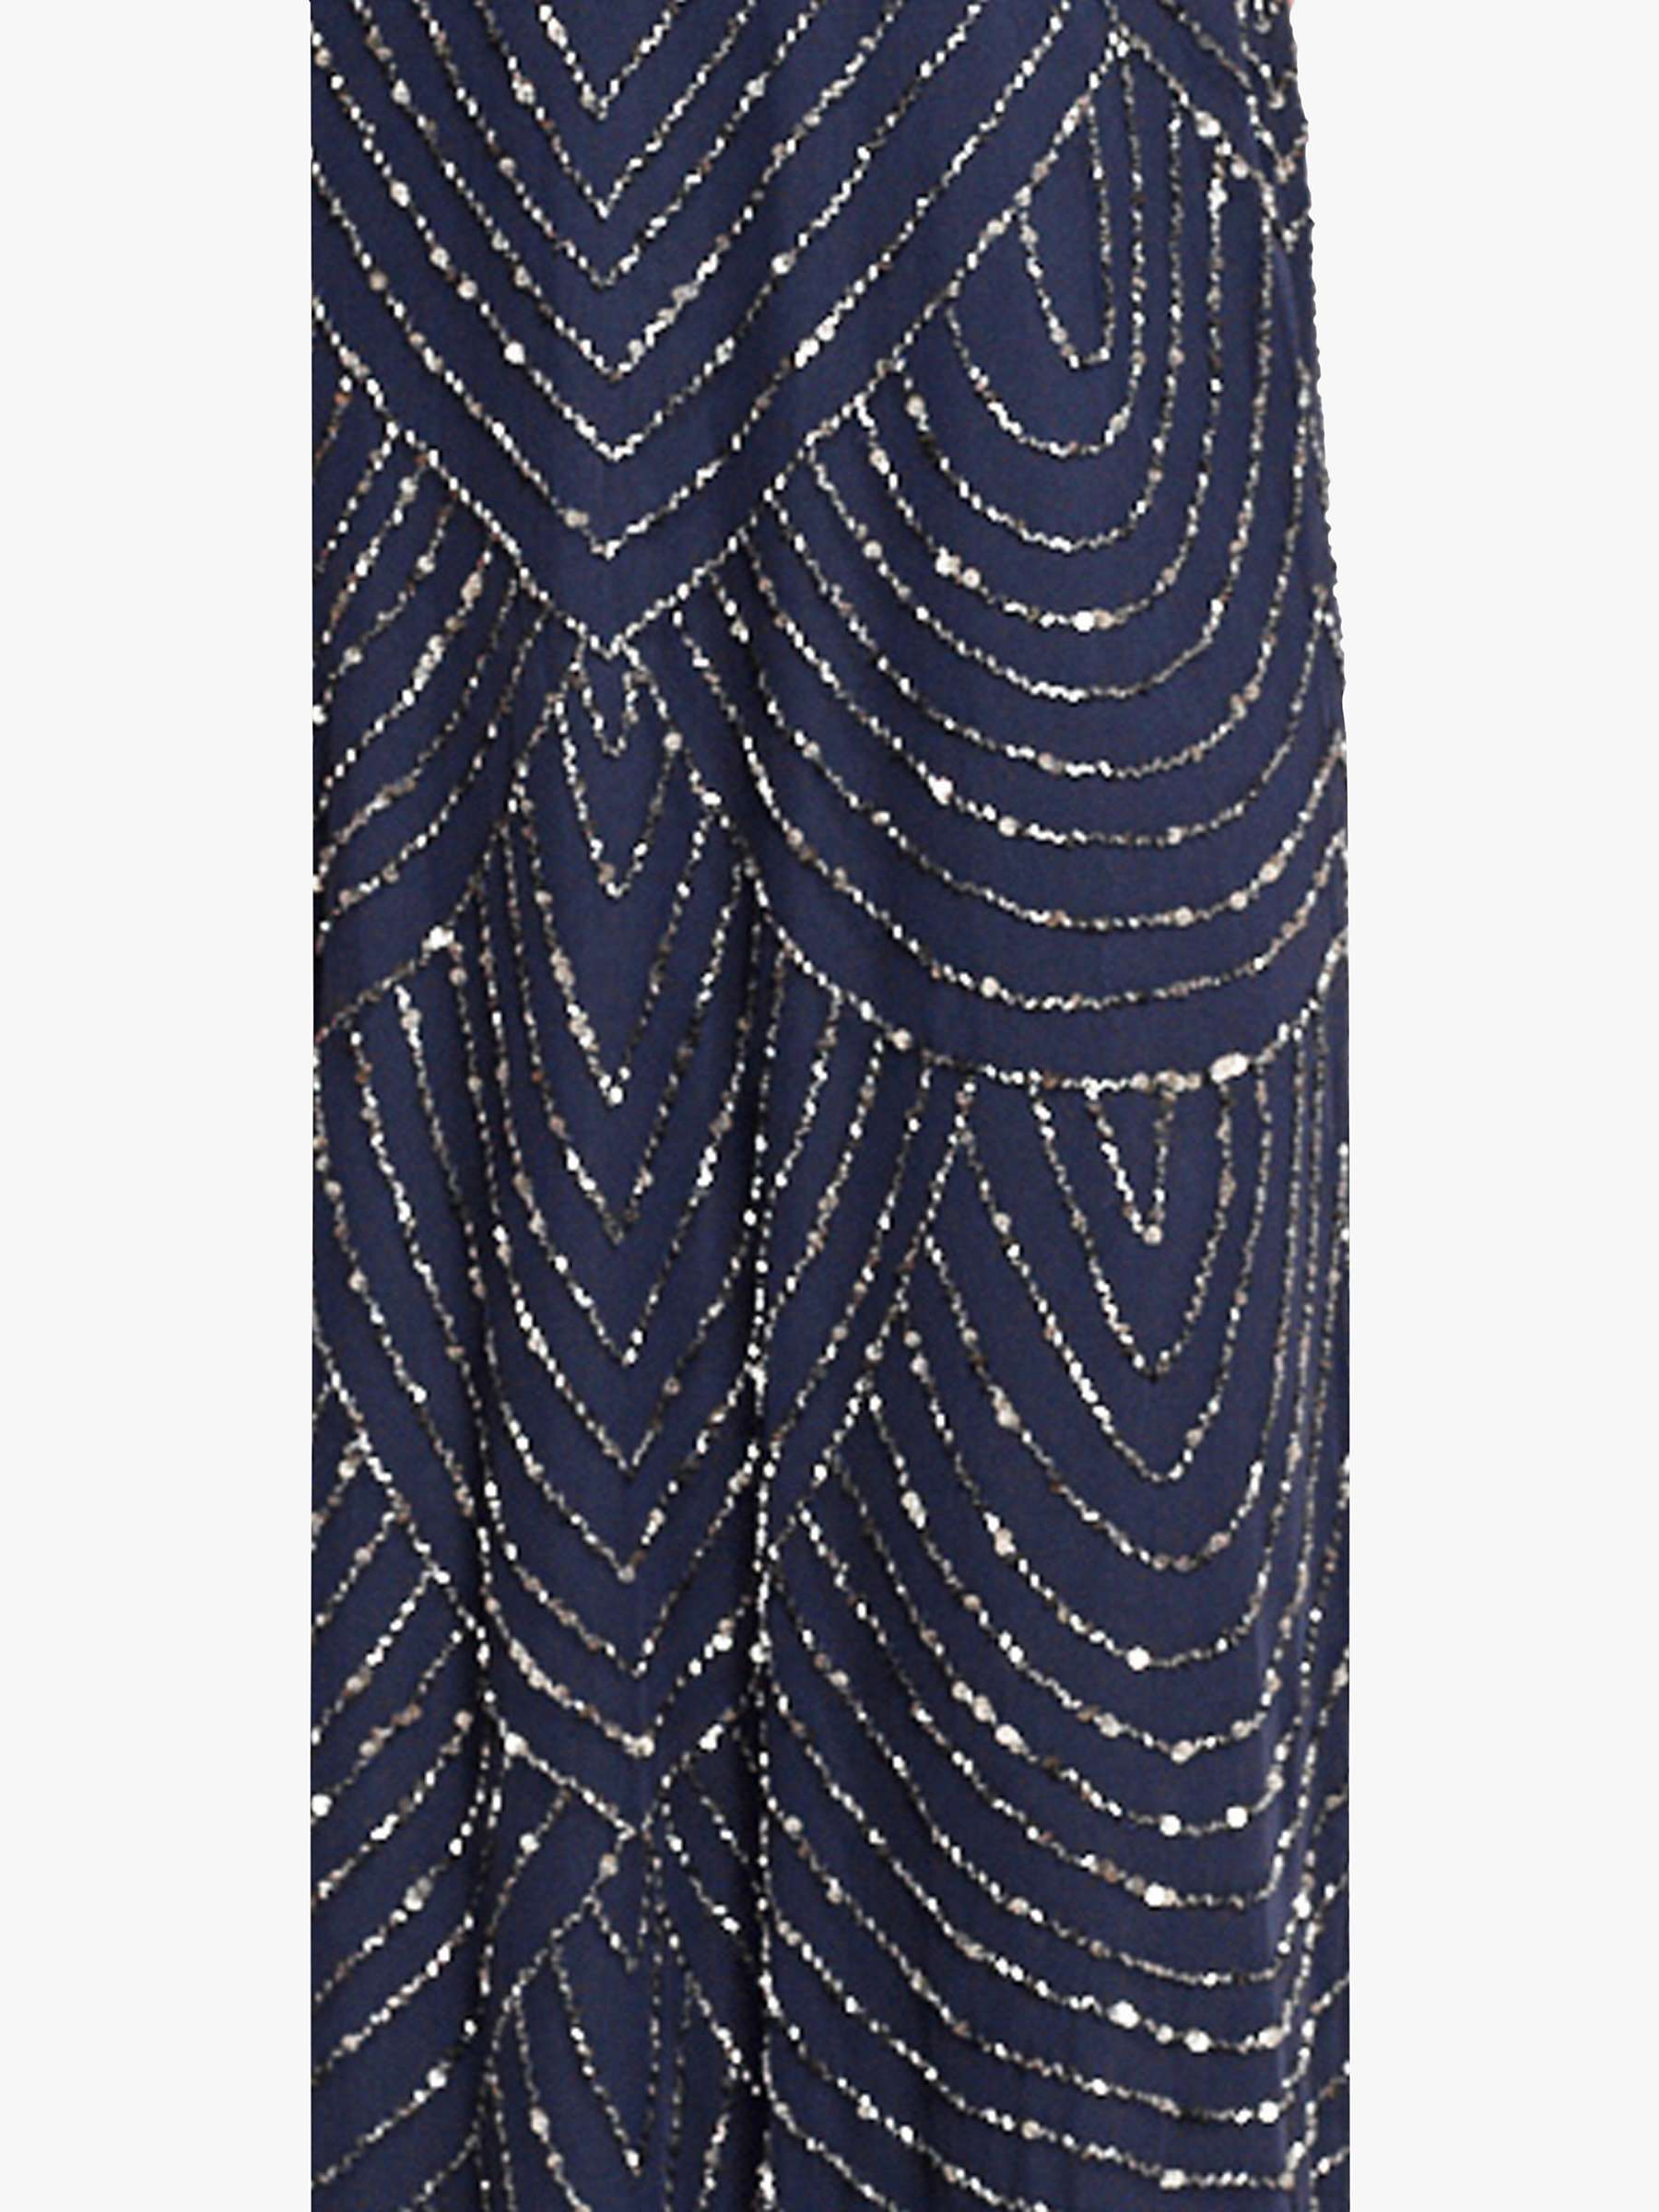 Buy Adrianna Papell Scallop Bead Spaghetti Strap Maxi Dress, Navy Online at johnlewis.com